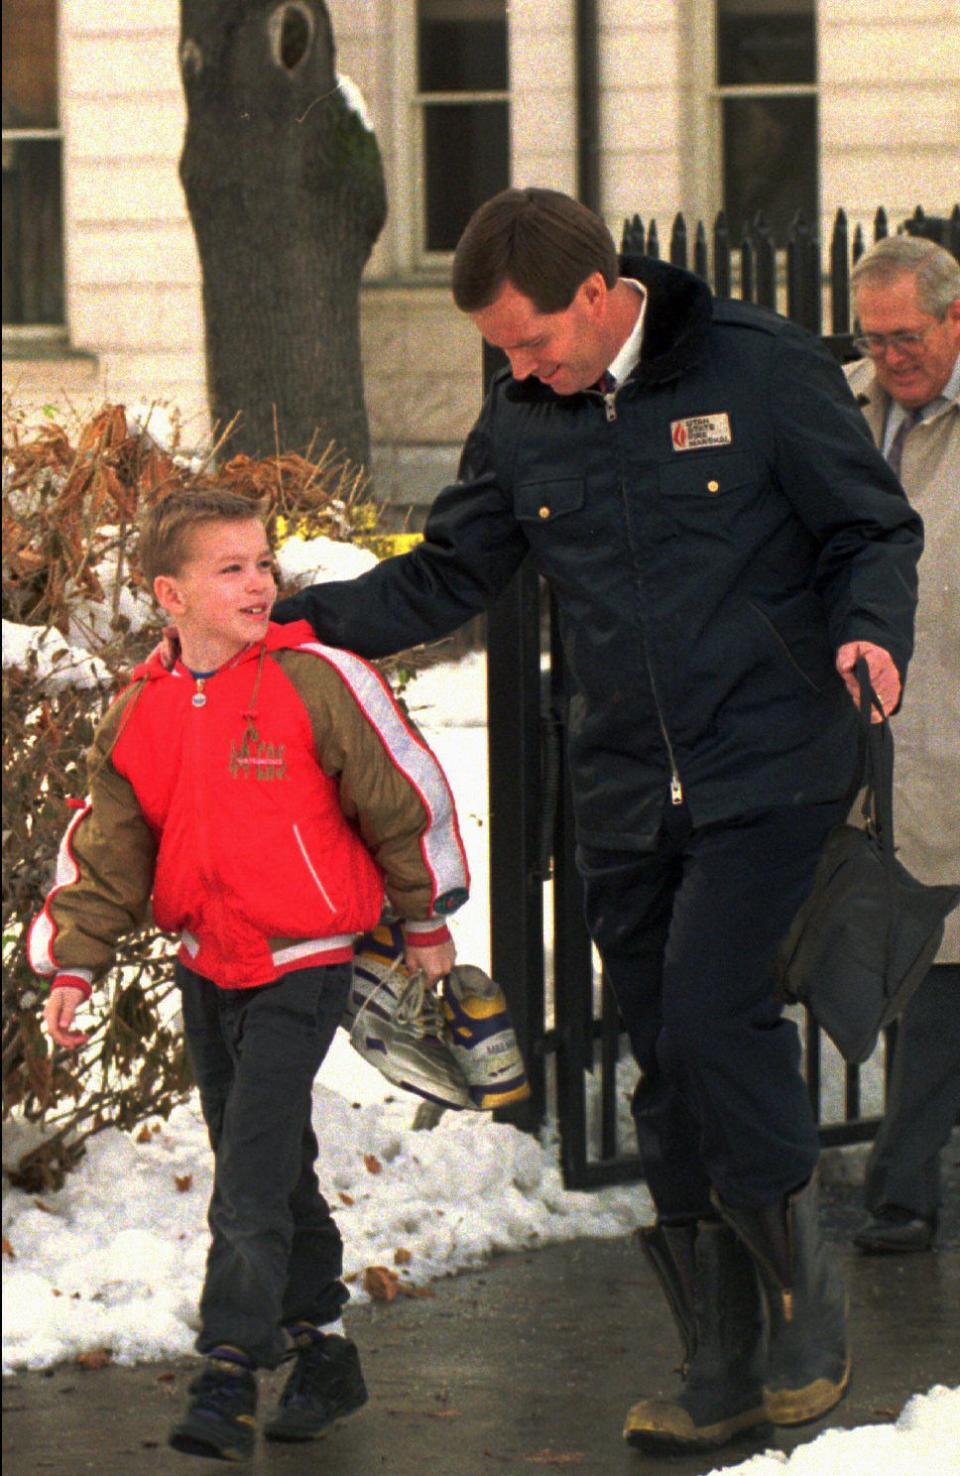 Gov. Mike Leavitt and his son, Case, salvage some items from the Governor’s Mansion after a Christmas tree fire on Dec. 15, 1993, in Salt Lake City. Case retrieved his favorite pair of basketball shoes, signed by Karl Malone. Gov. Leavitt got some shoes and a couple of suits. | Gerald W. Silver, Deseret News